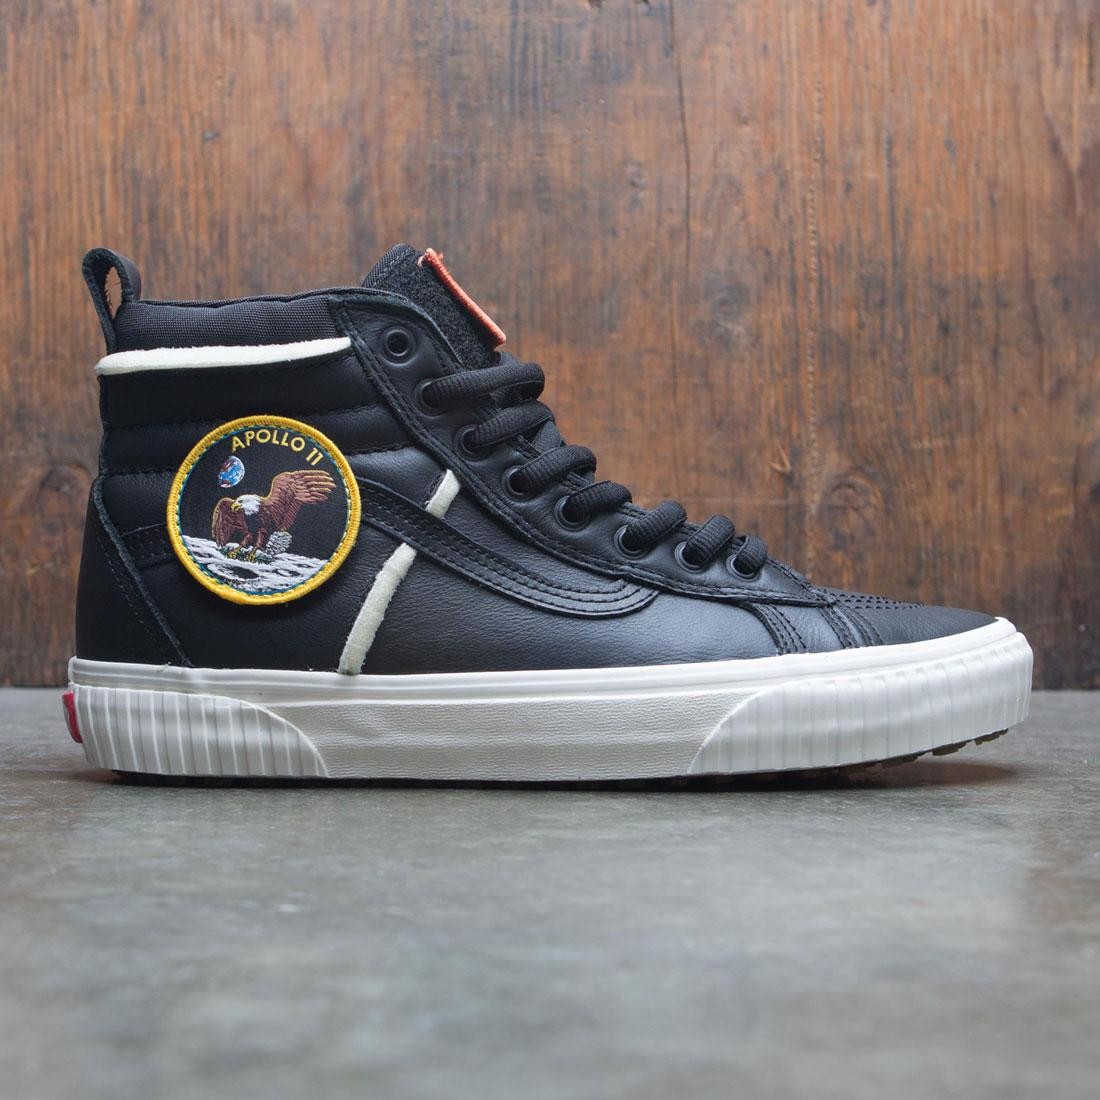 the vans space voyager